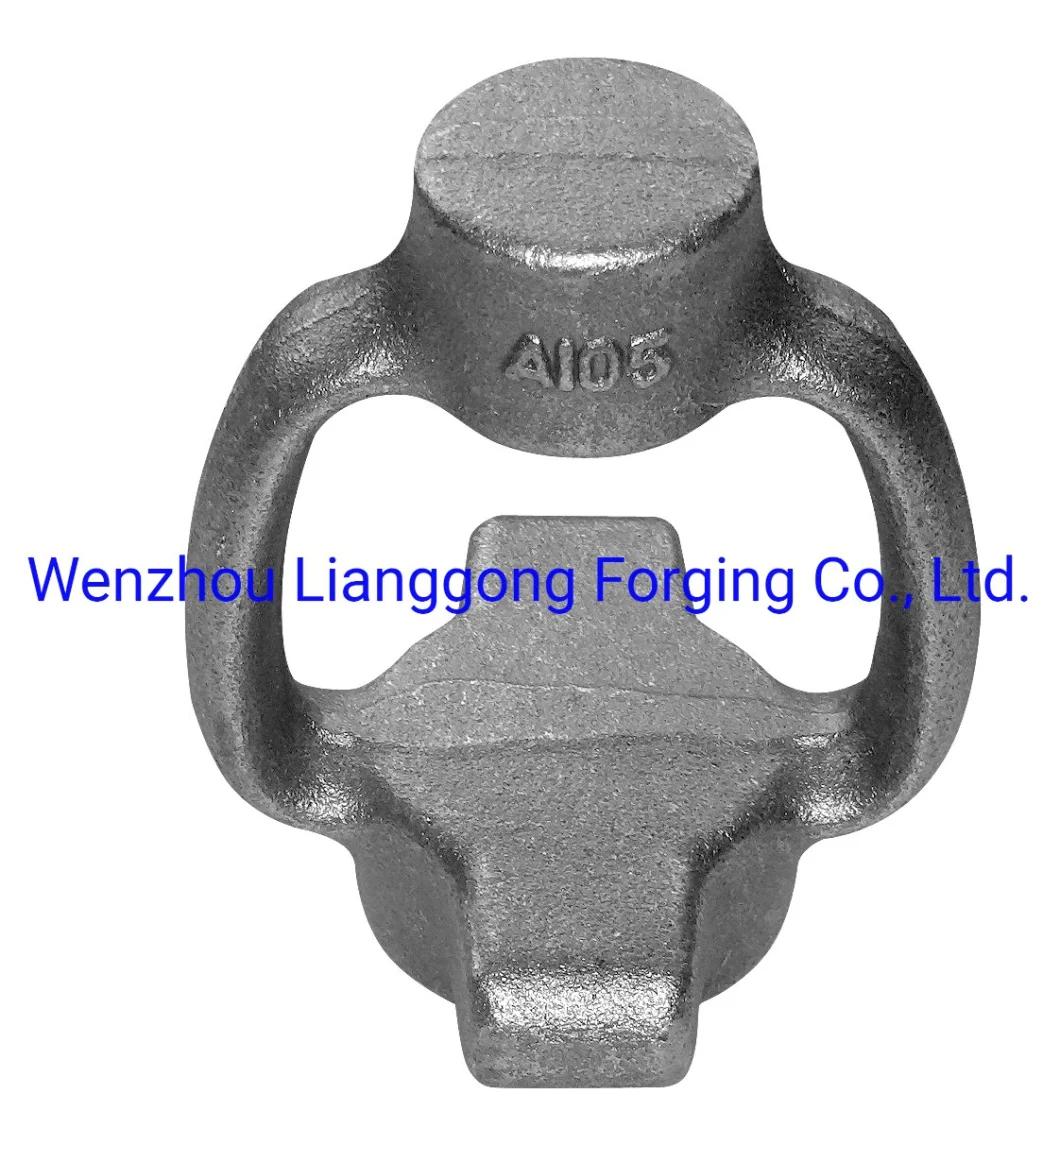 Custom Forged Steel Valve Components with Carbon Steel/Alloy Steel/Stainless Steel